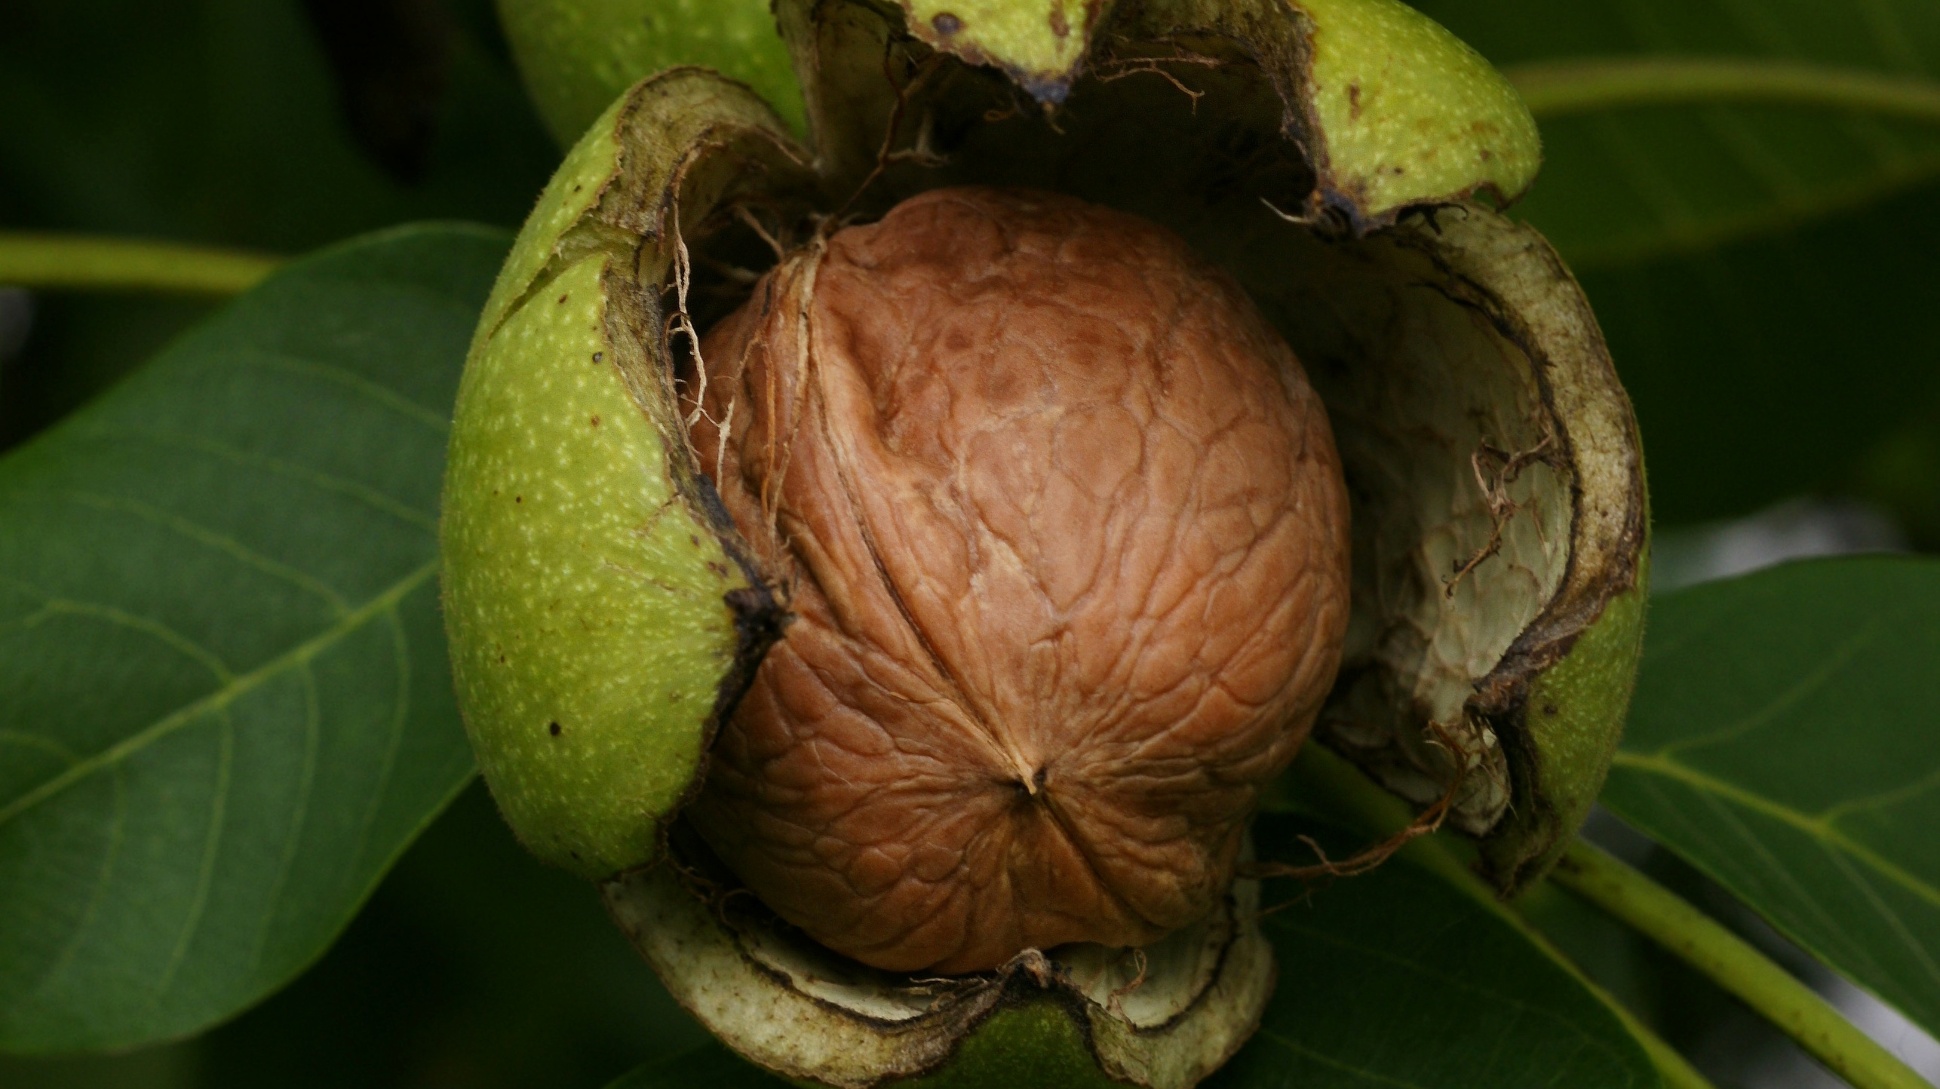 A brown wrinkled walnut inside a green fruit surrounded by leaves